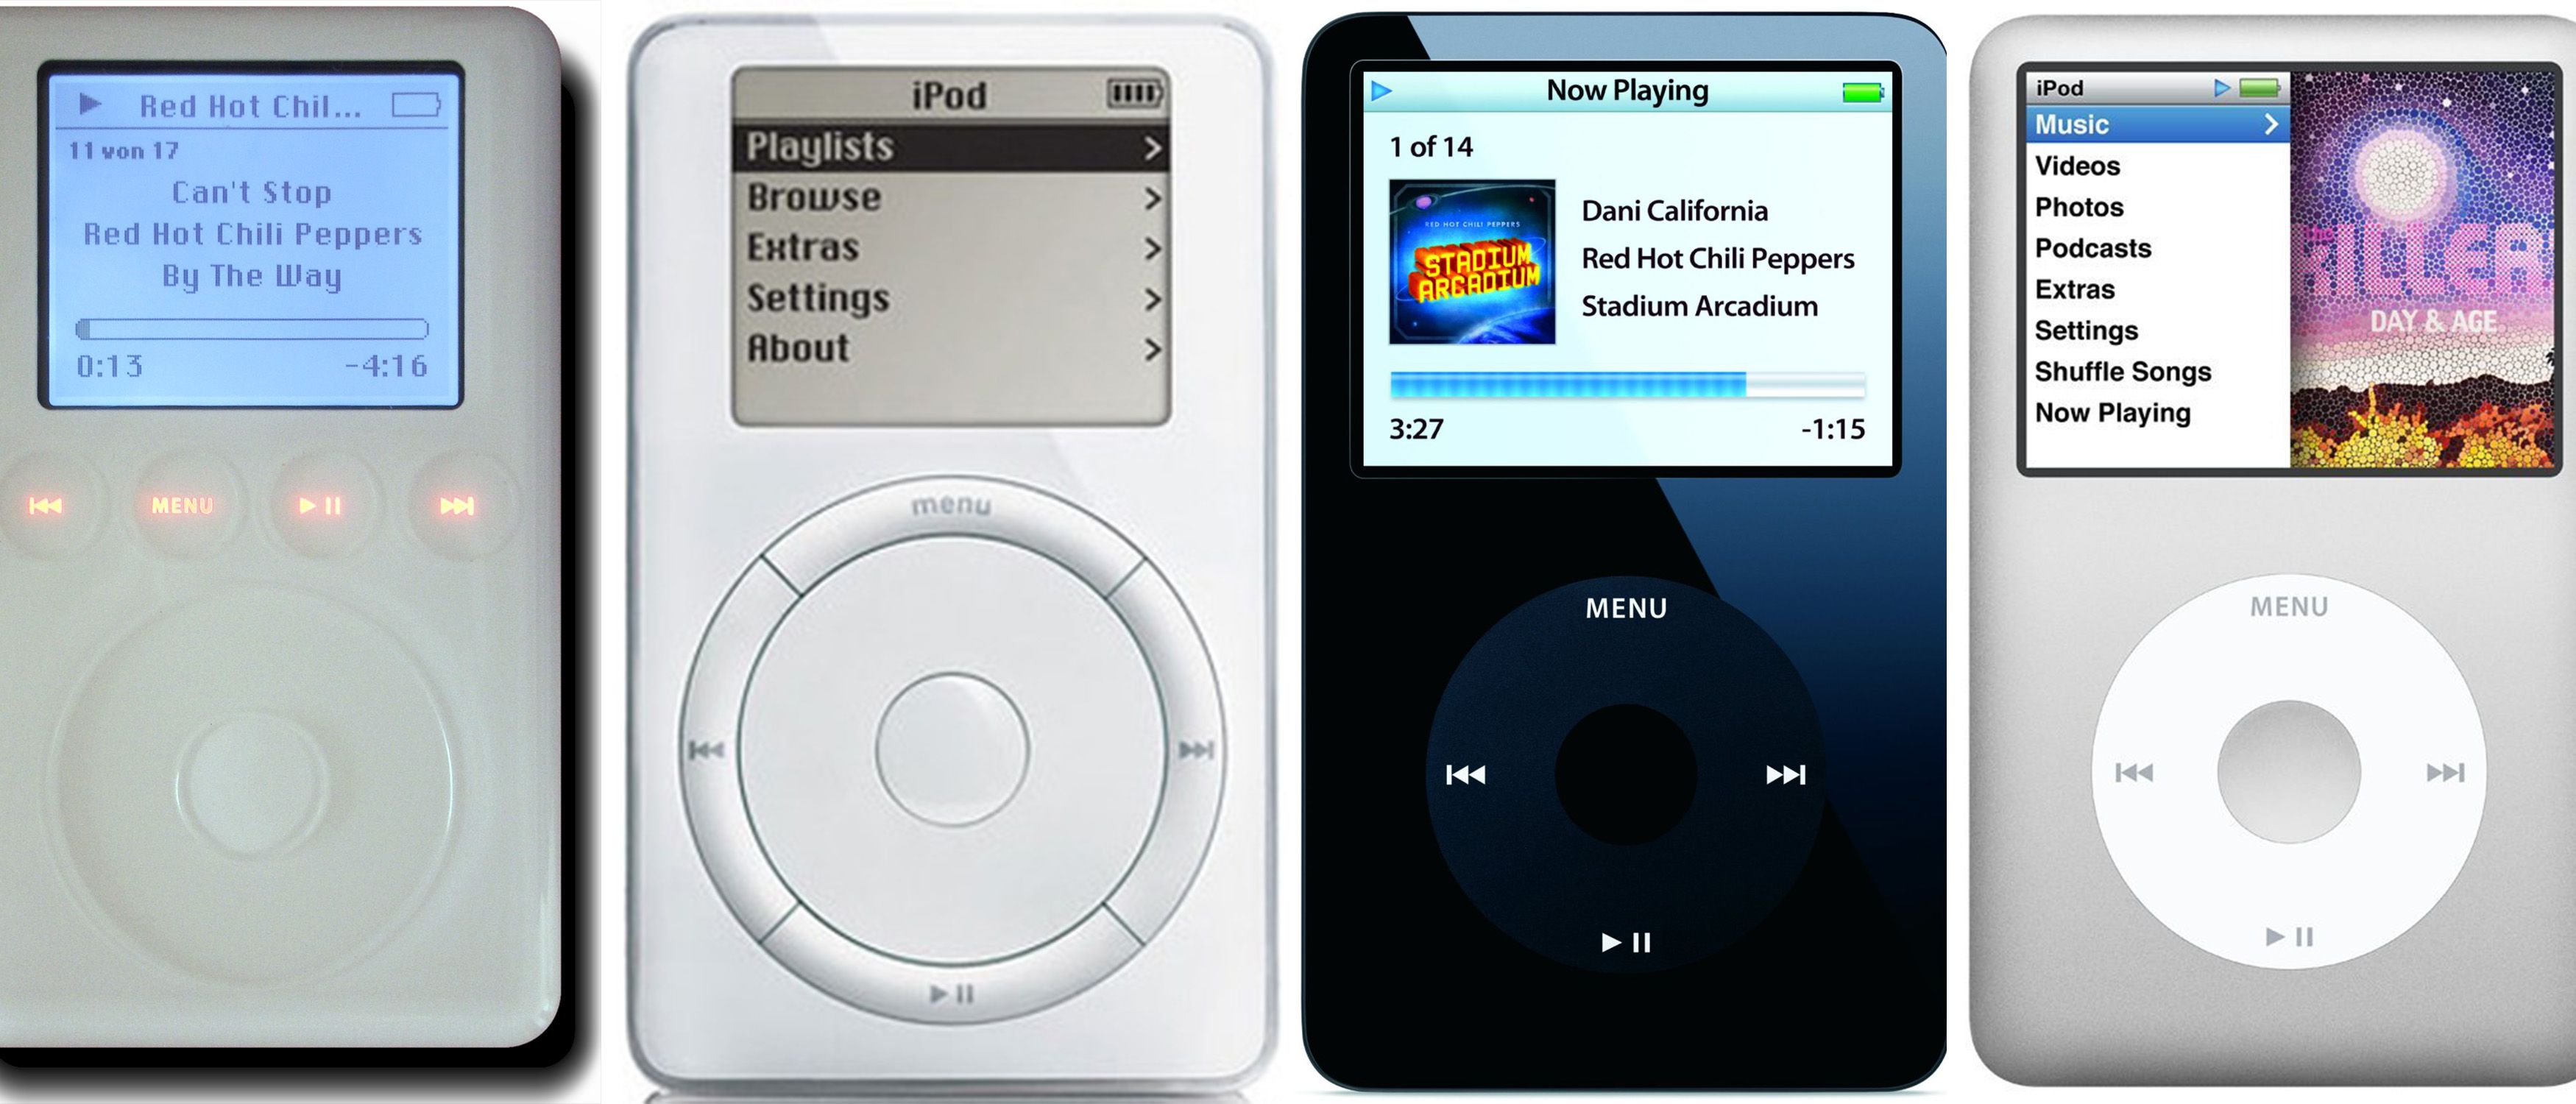 download the new version for ipod ToDoList 8.2.1